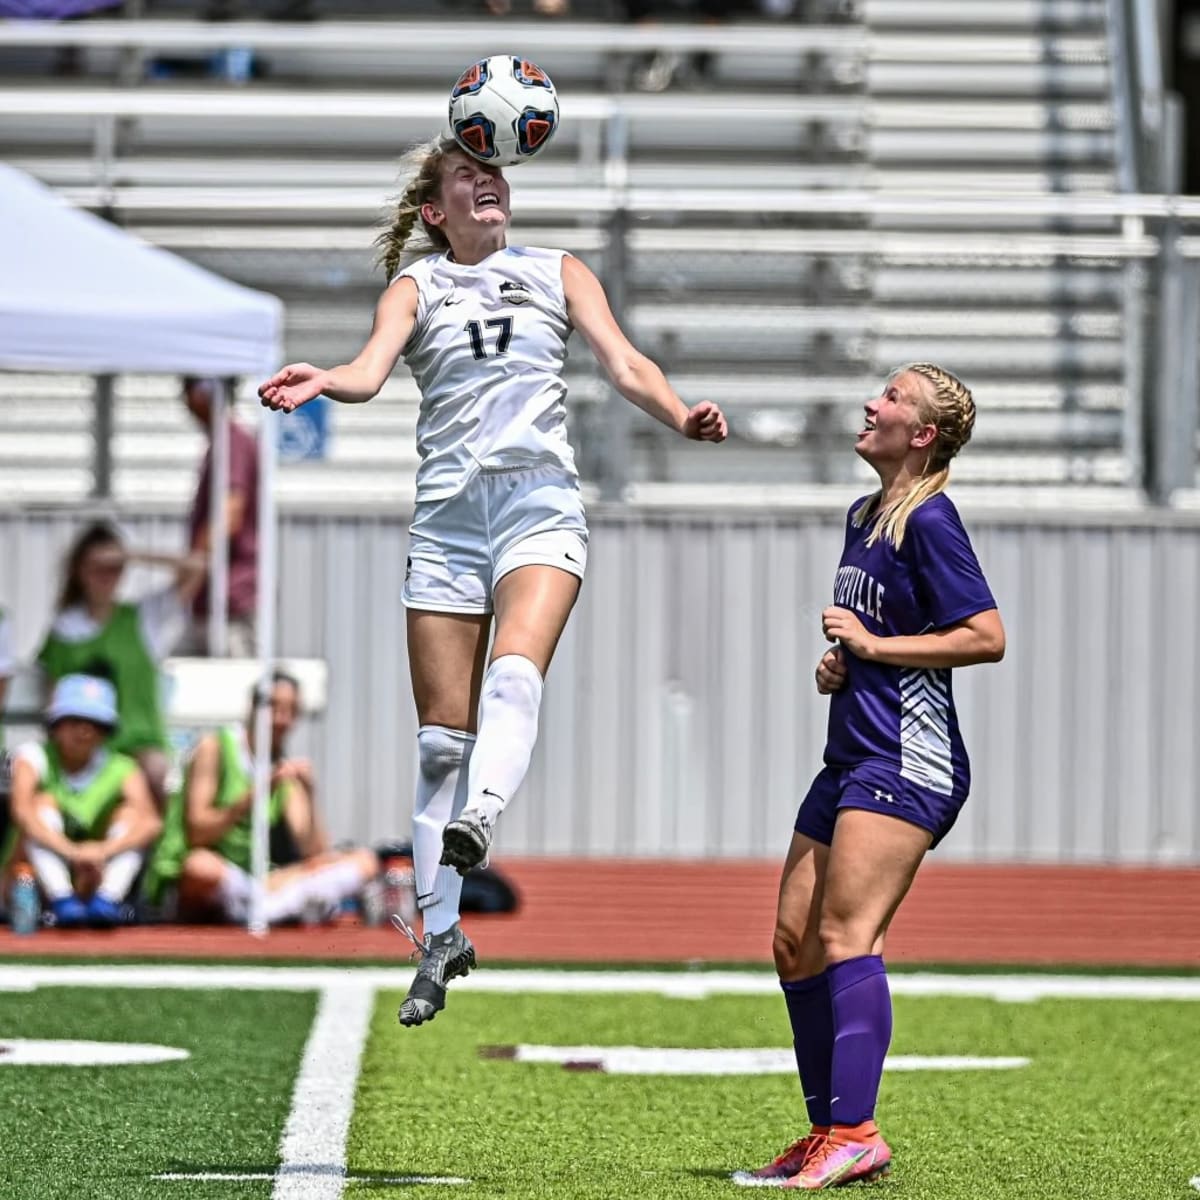 The Star's All-County Girls Soccer First Team for 2022-23 season